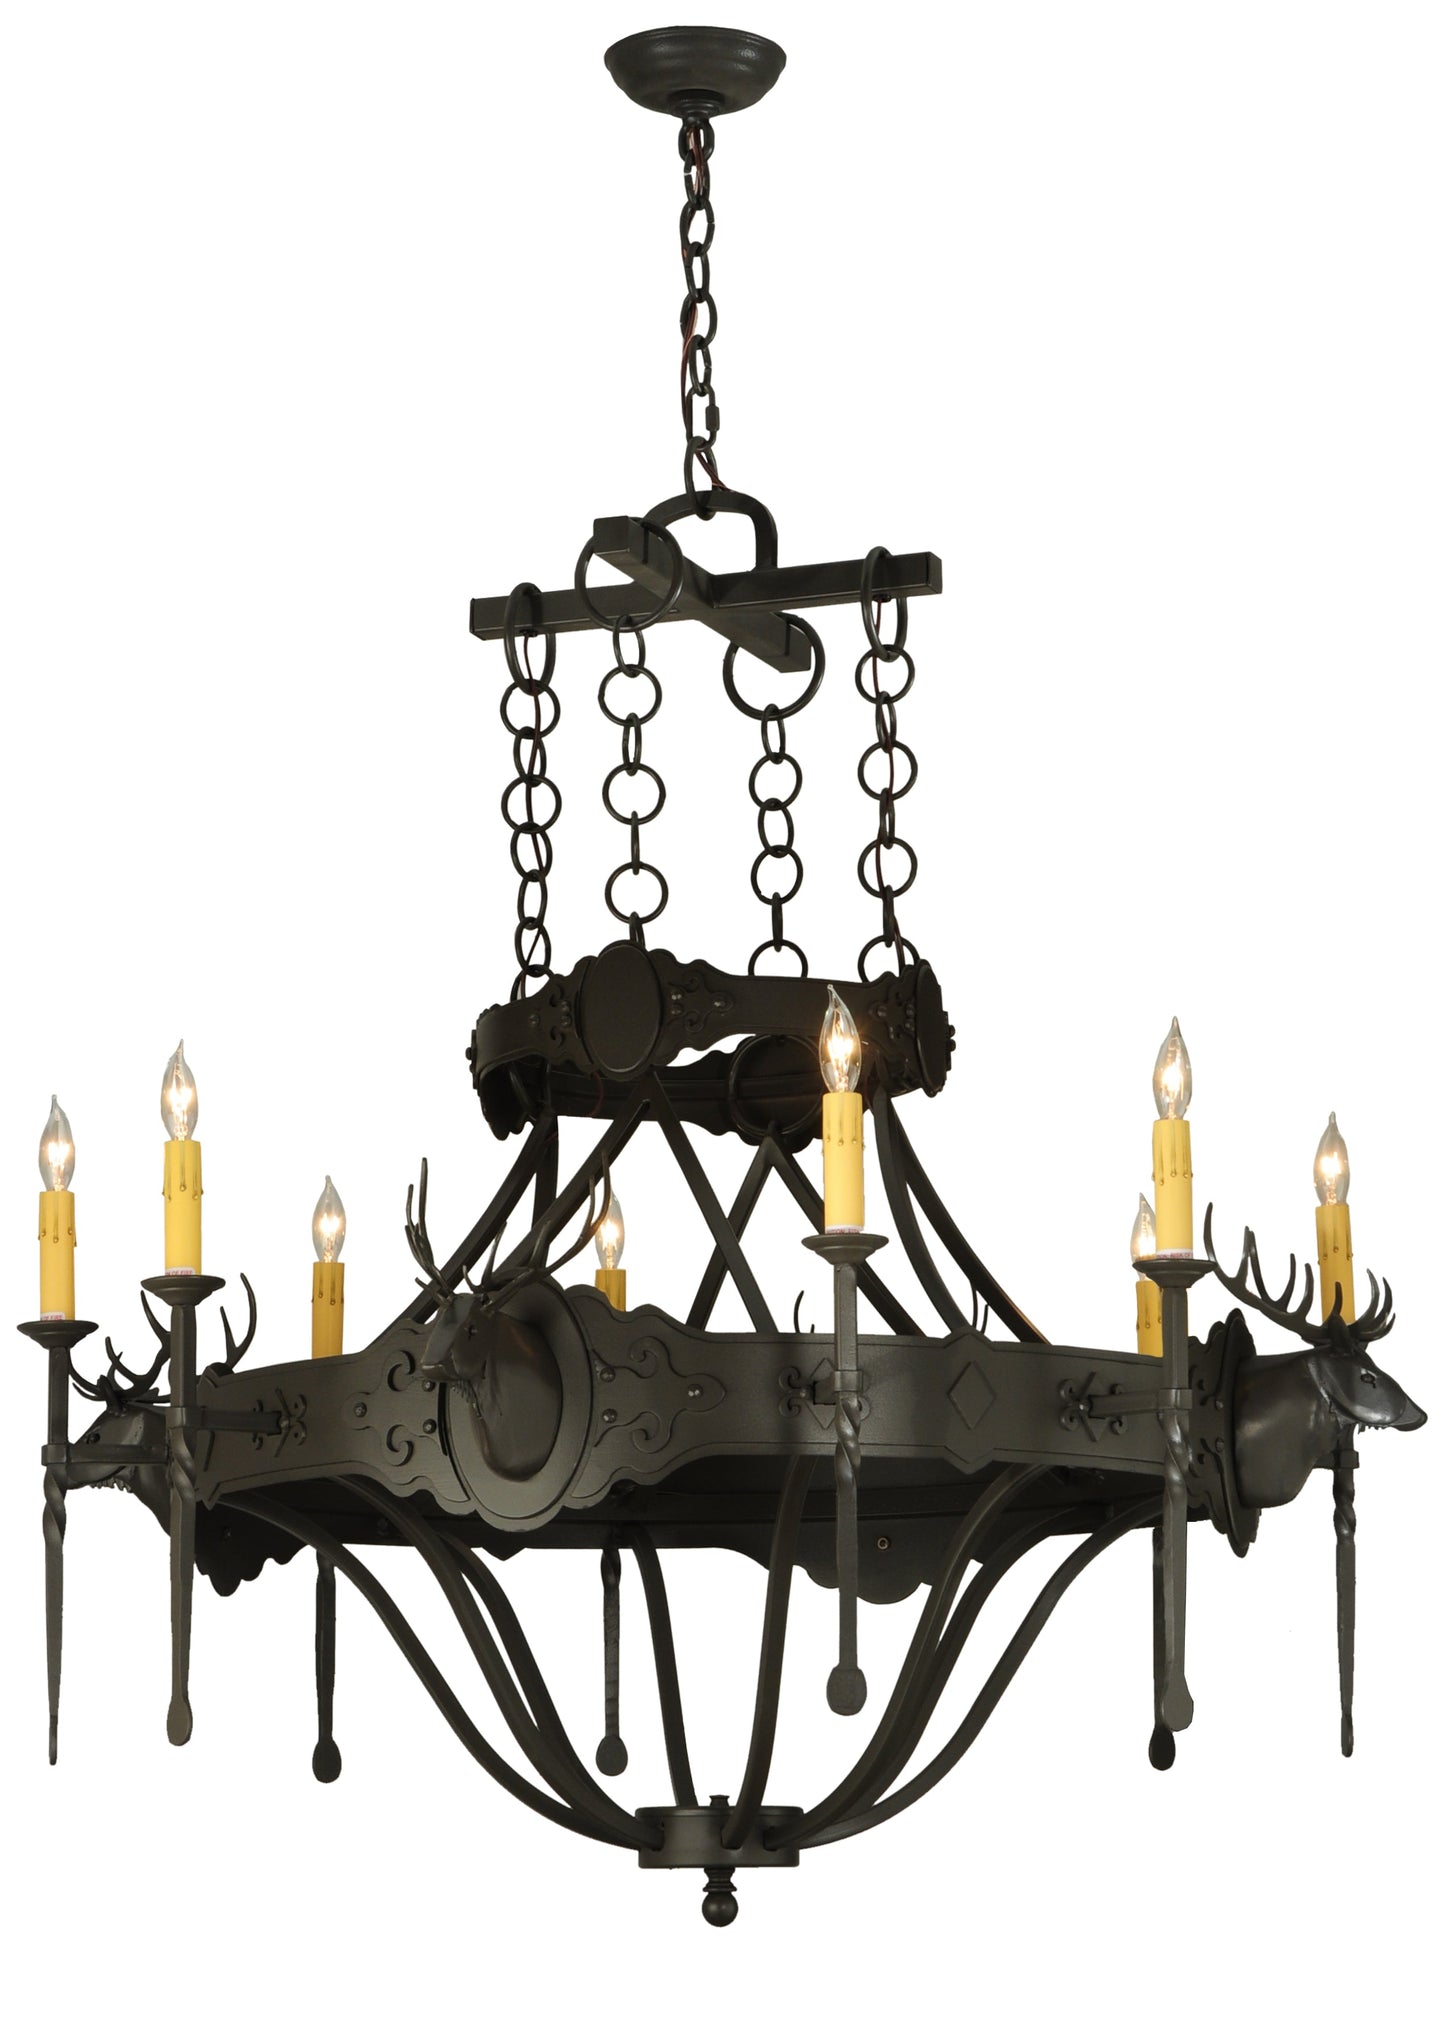 40" Stag 8-Light Chandelier by 2nd Ave Lighting